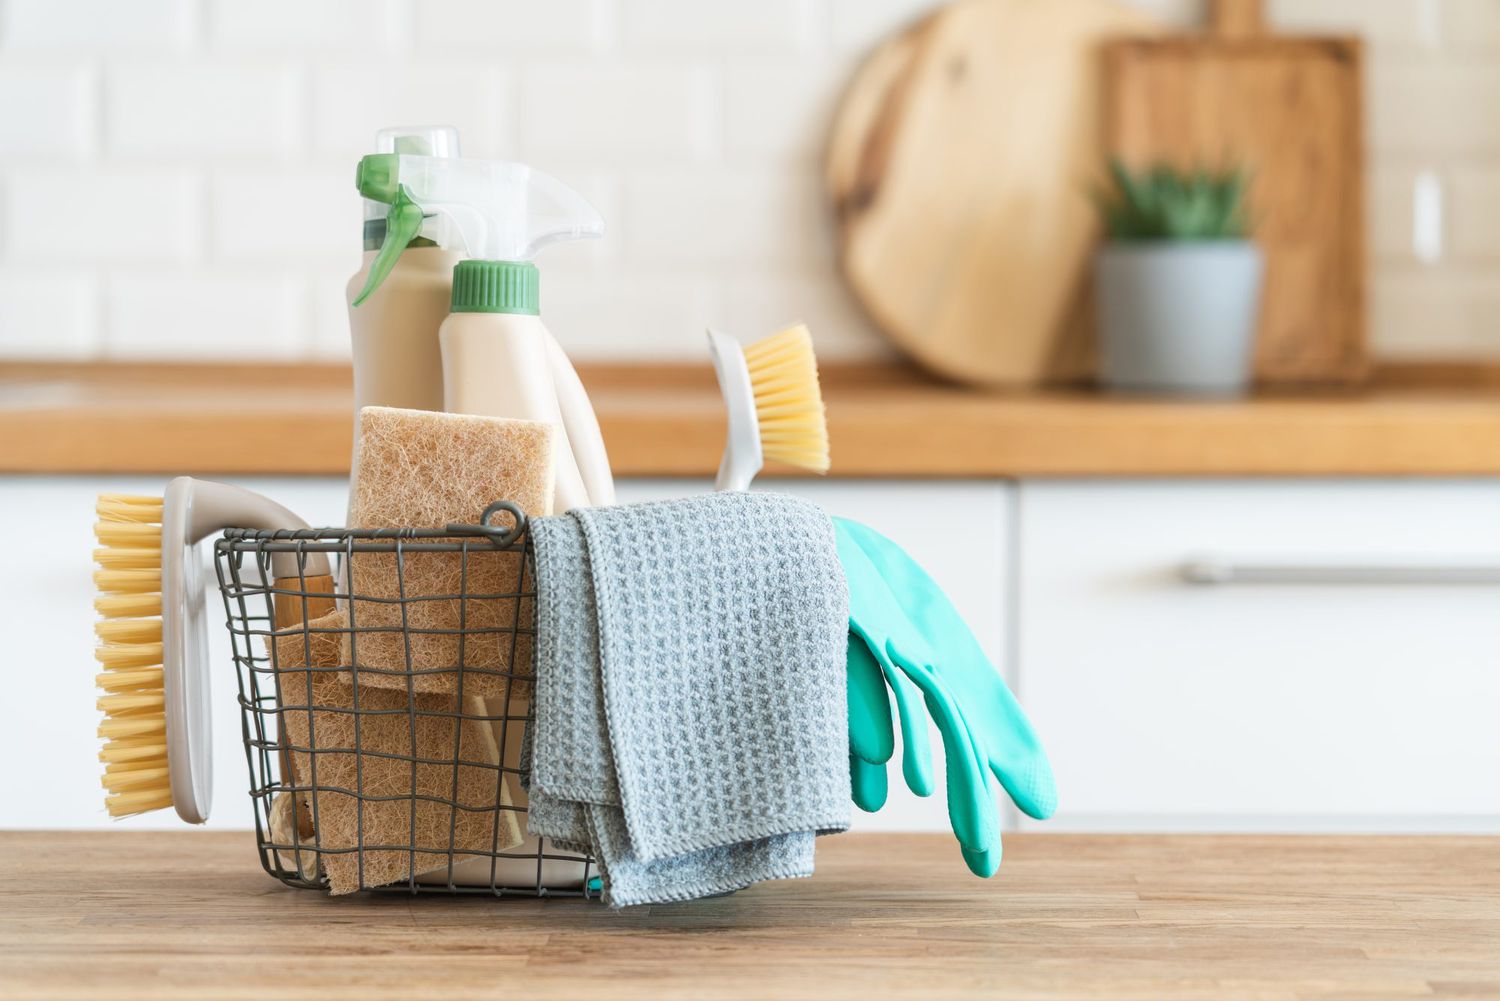 Quick, easy guide to a good spring clean